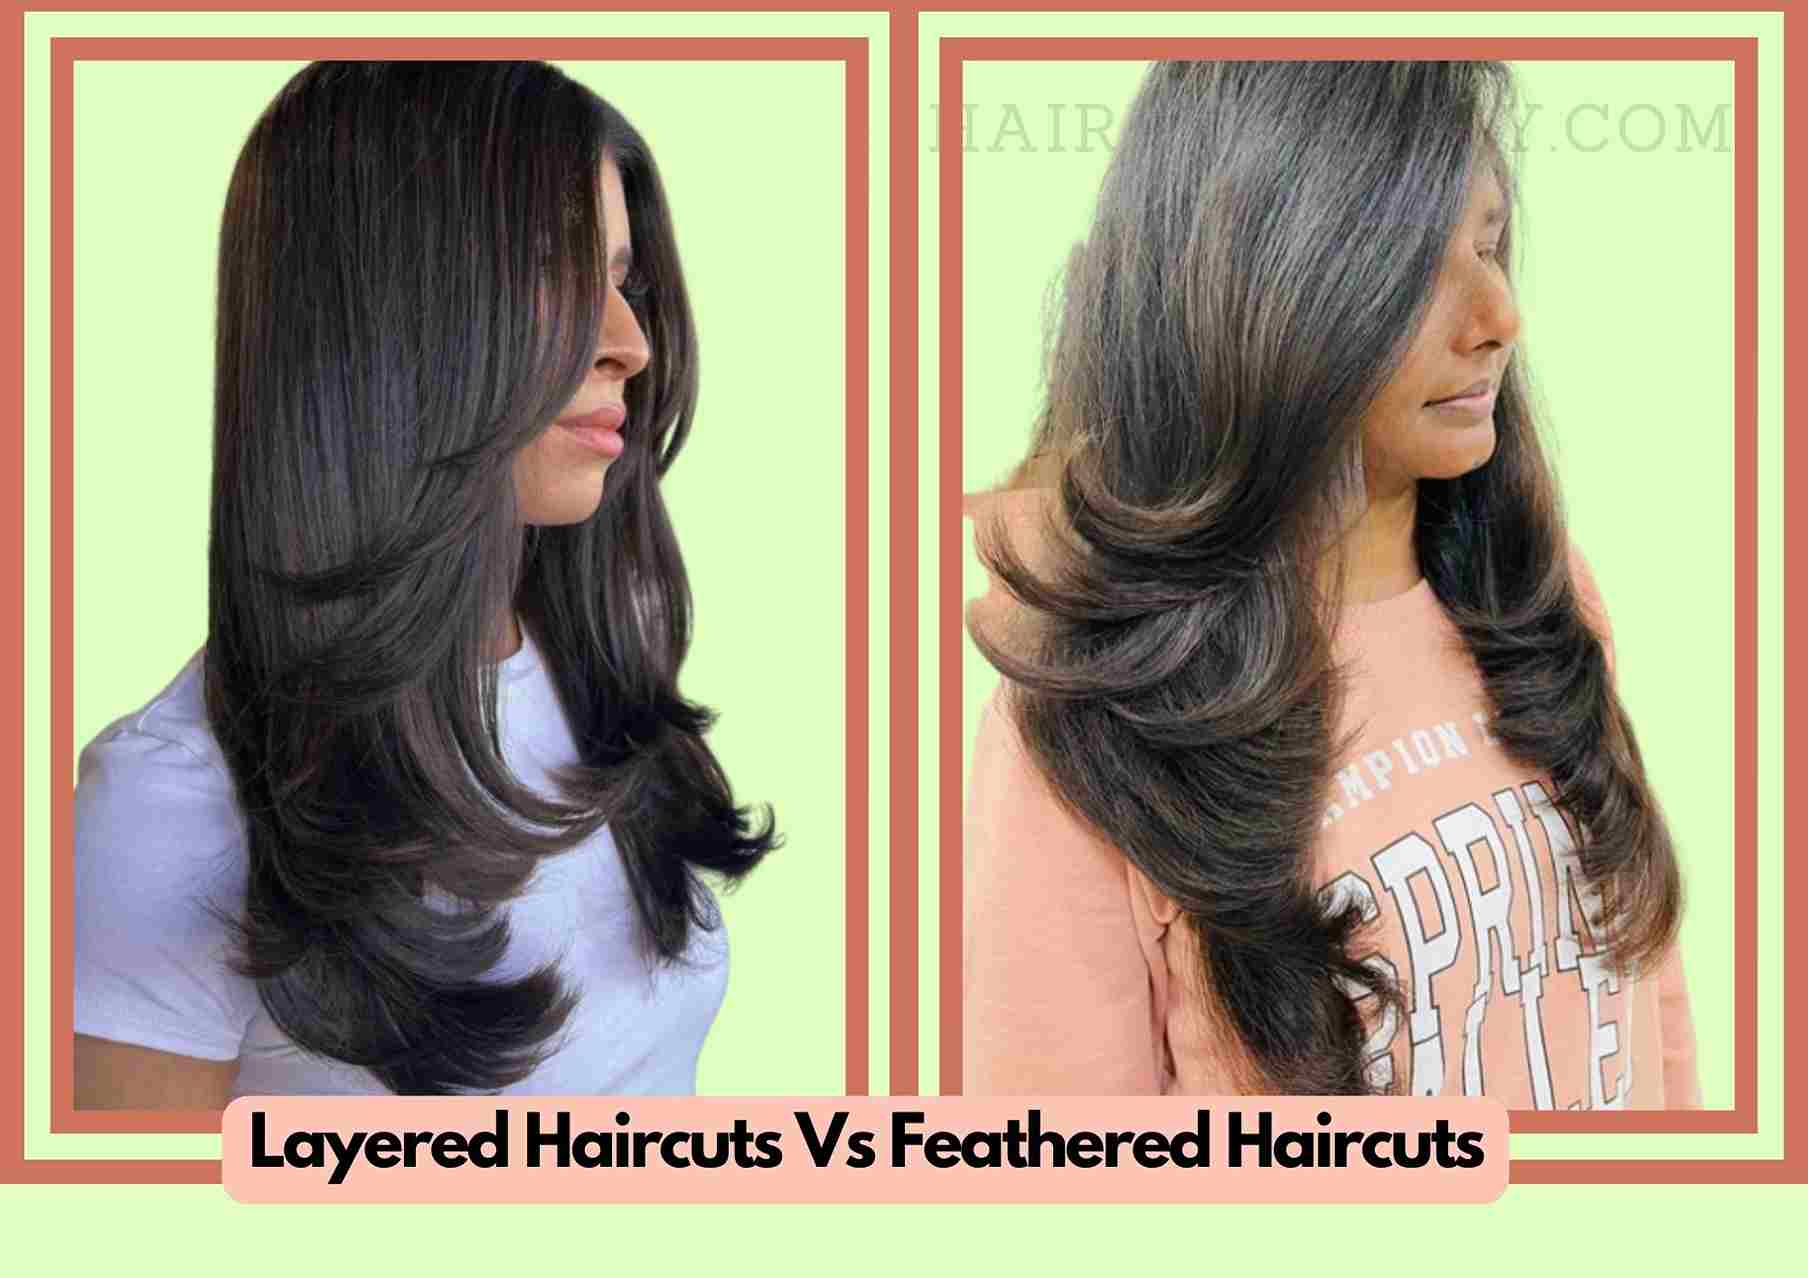 Layered Haircuts Vs Feathered Cut | Differences, Advantages, And 10 Best  Haircuts For Each - Hair Everyday Review